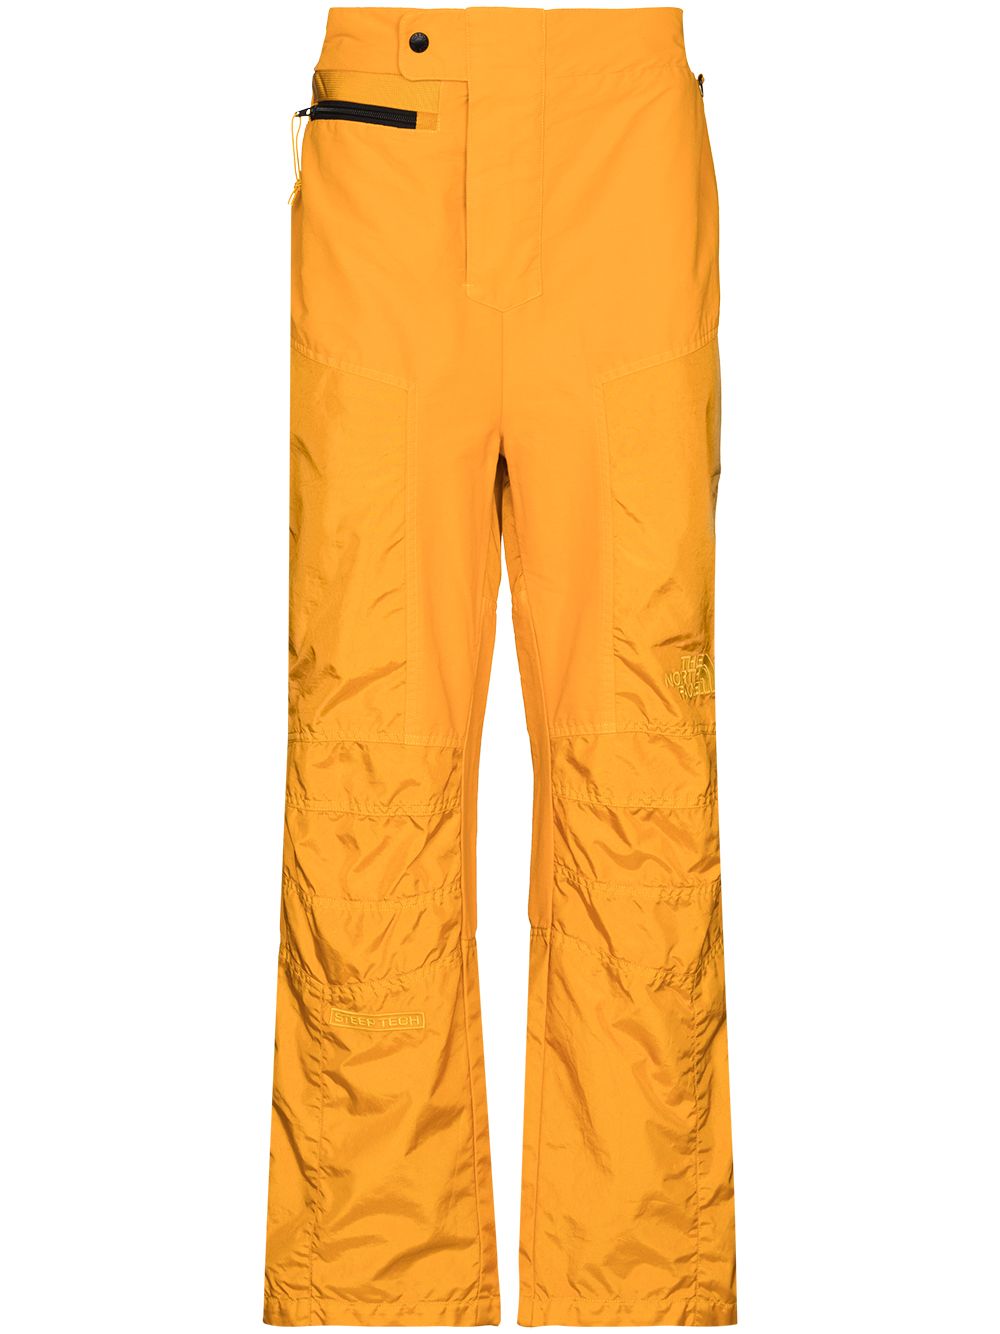 The North Face Black Label Steep tech trousers - Yellow von The North Face Black Label